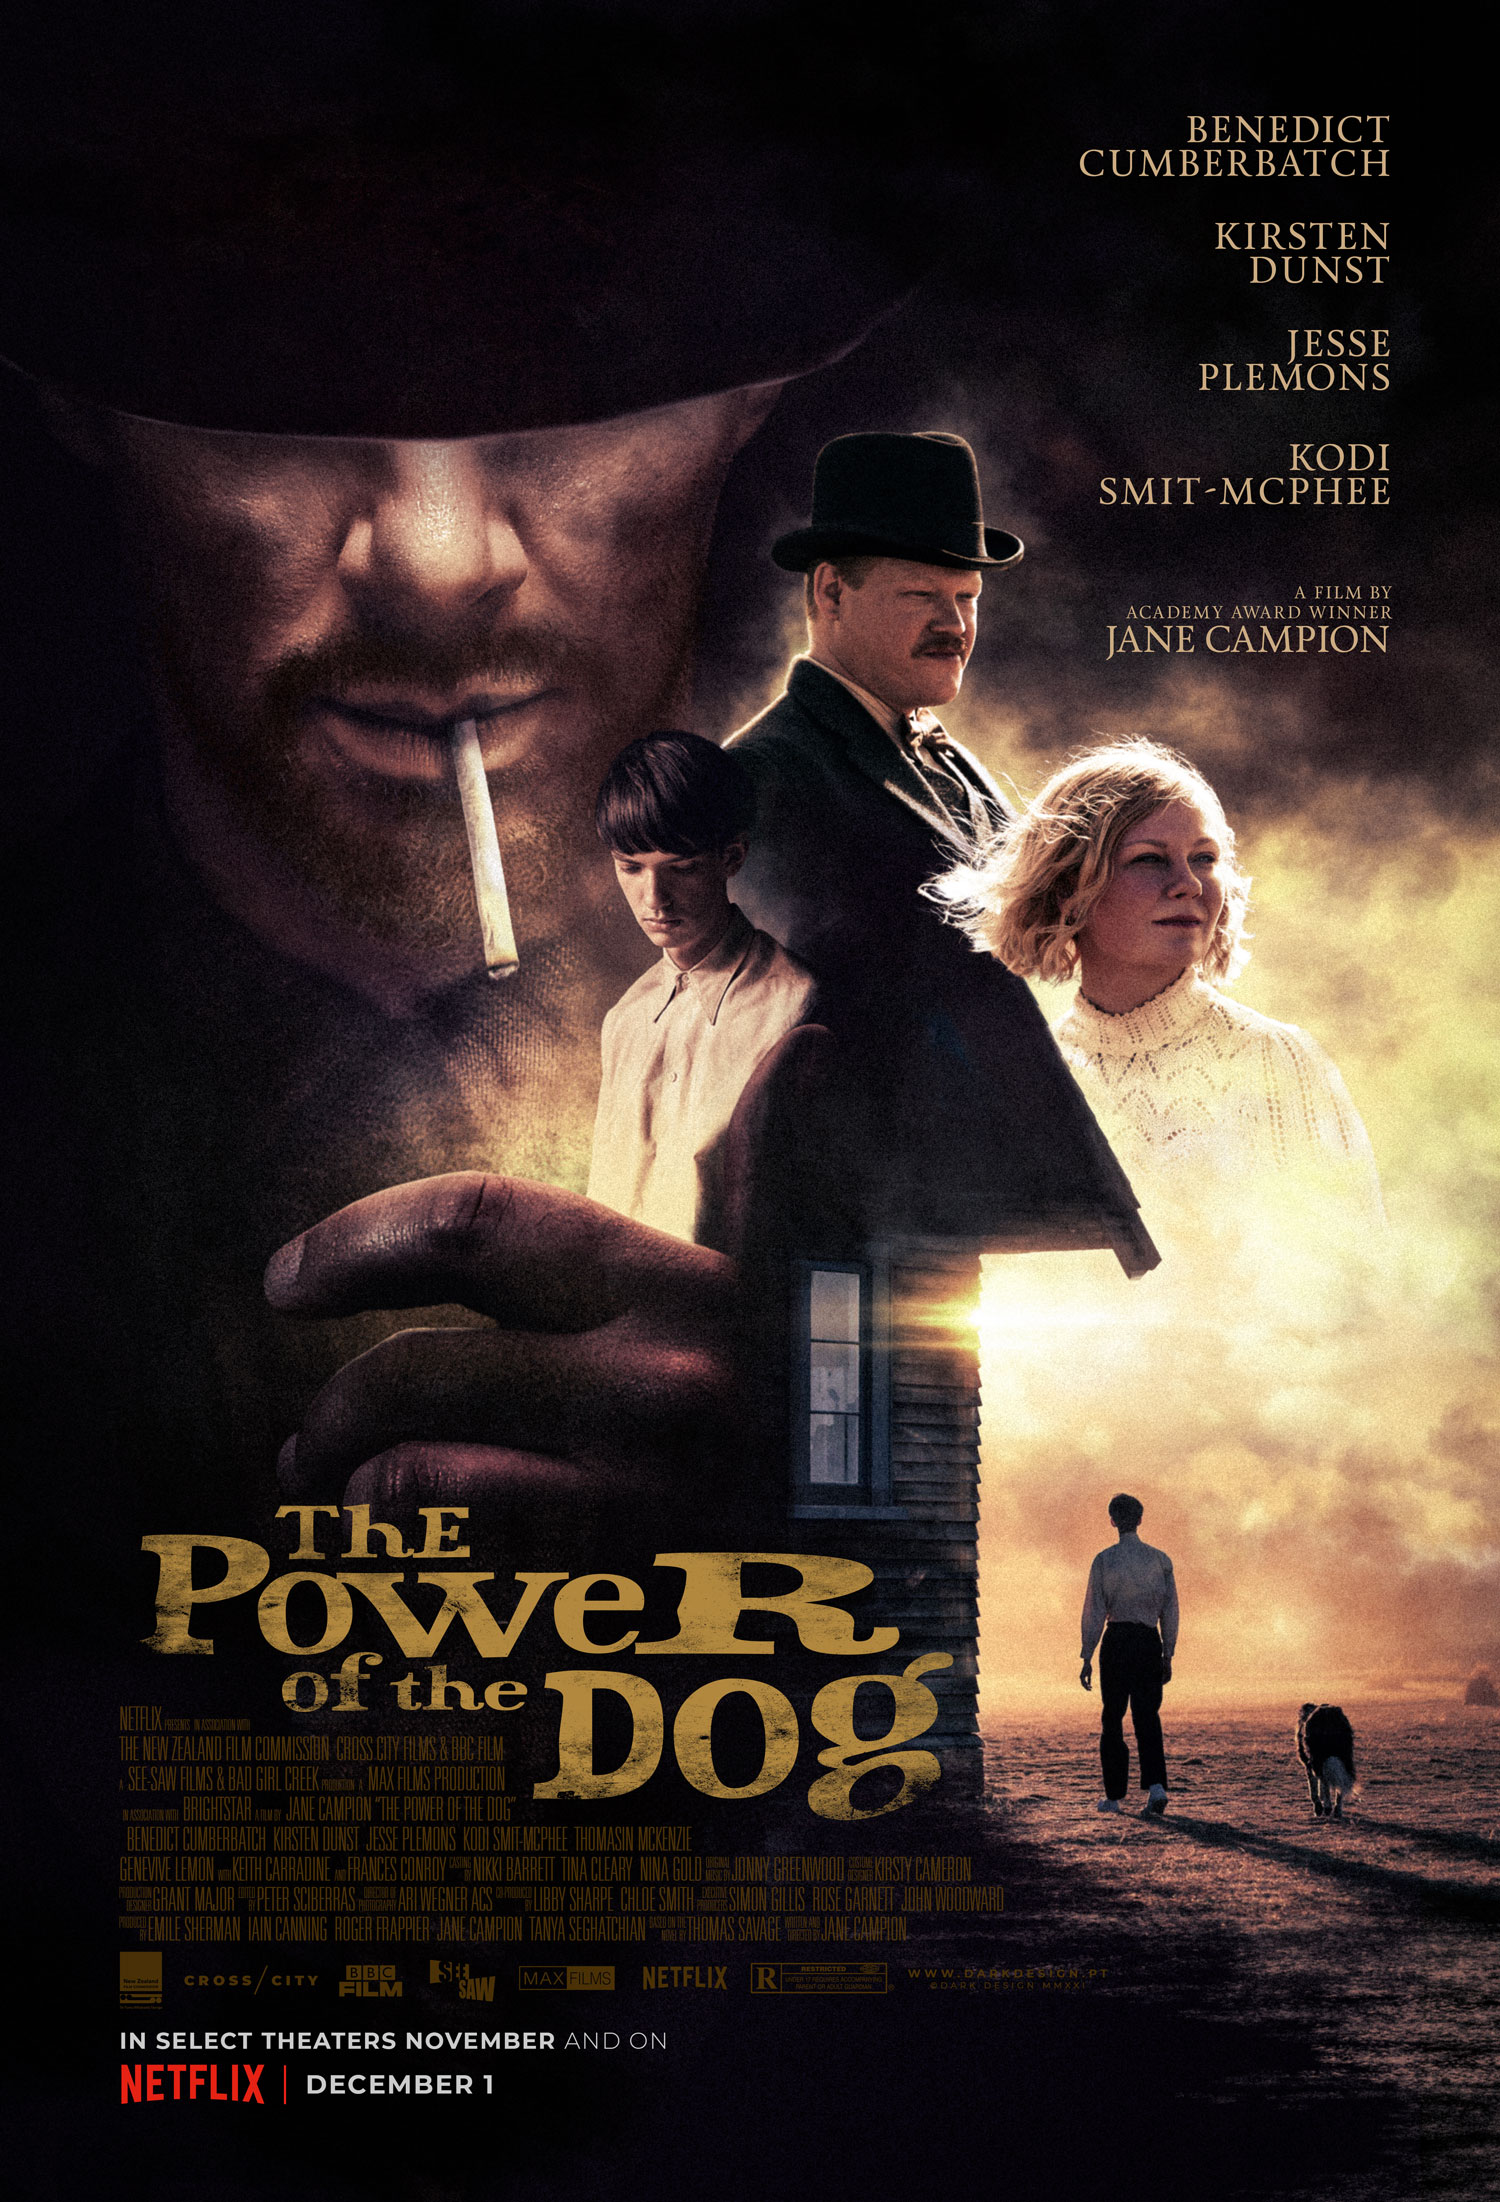 The Power Of The Dog | Darkdesign | PosterSpy